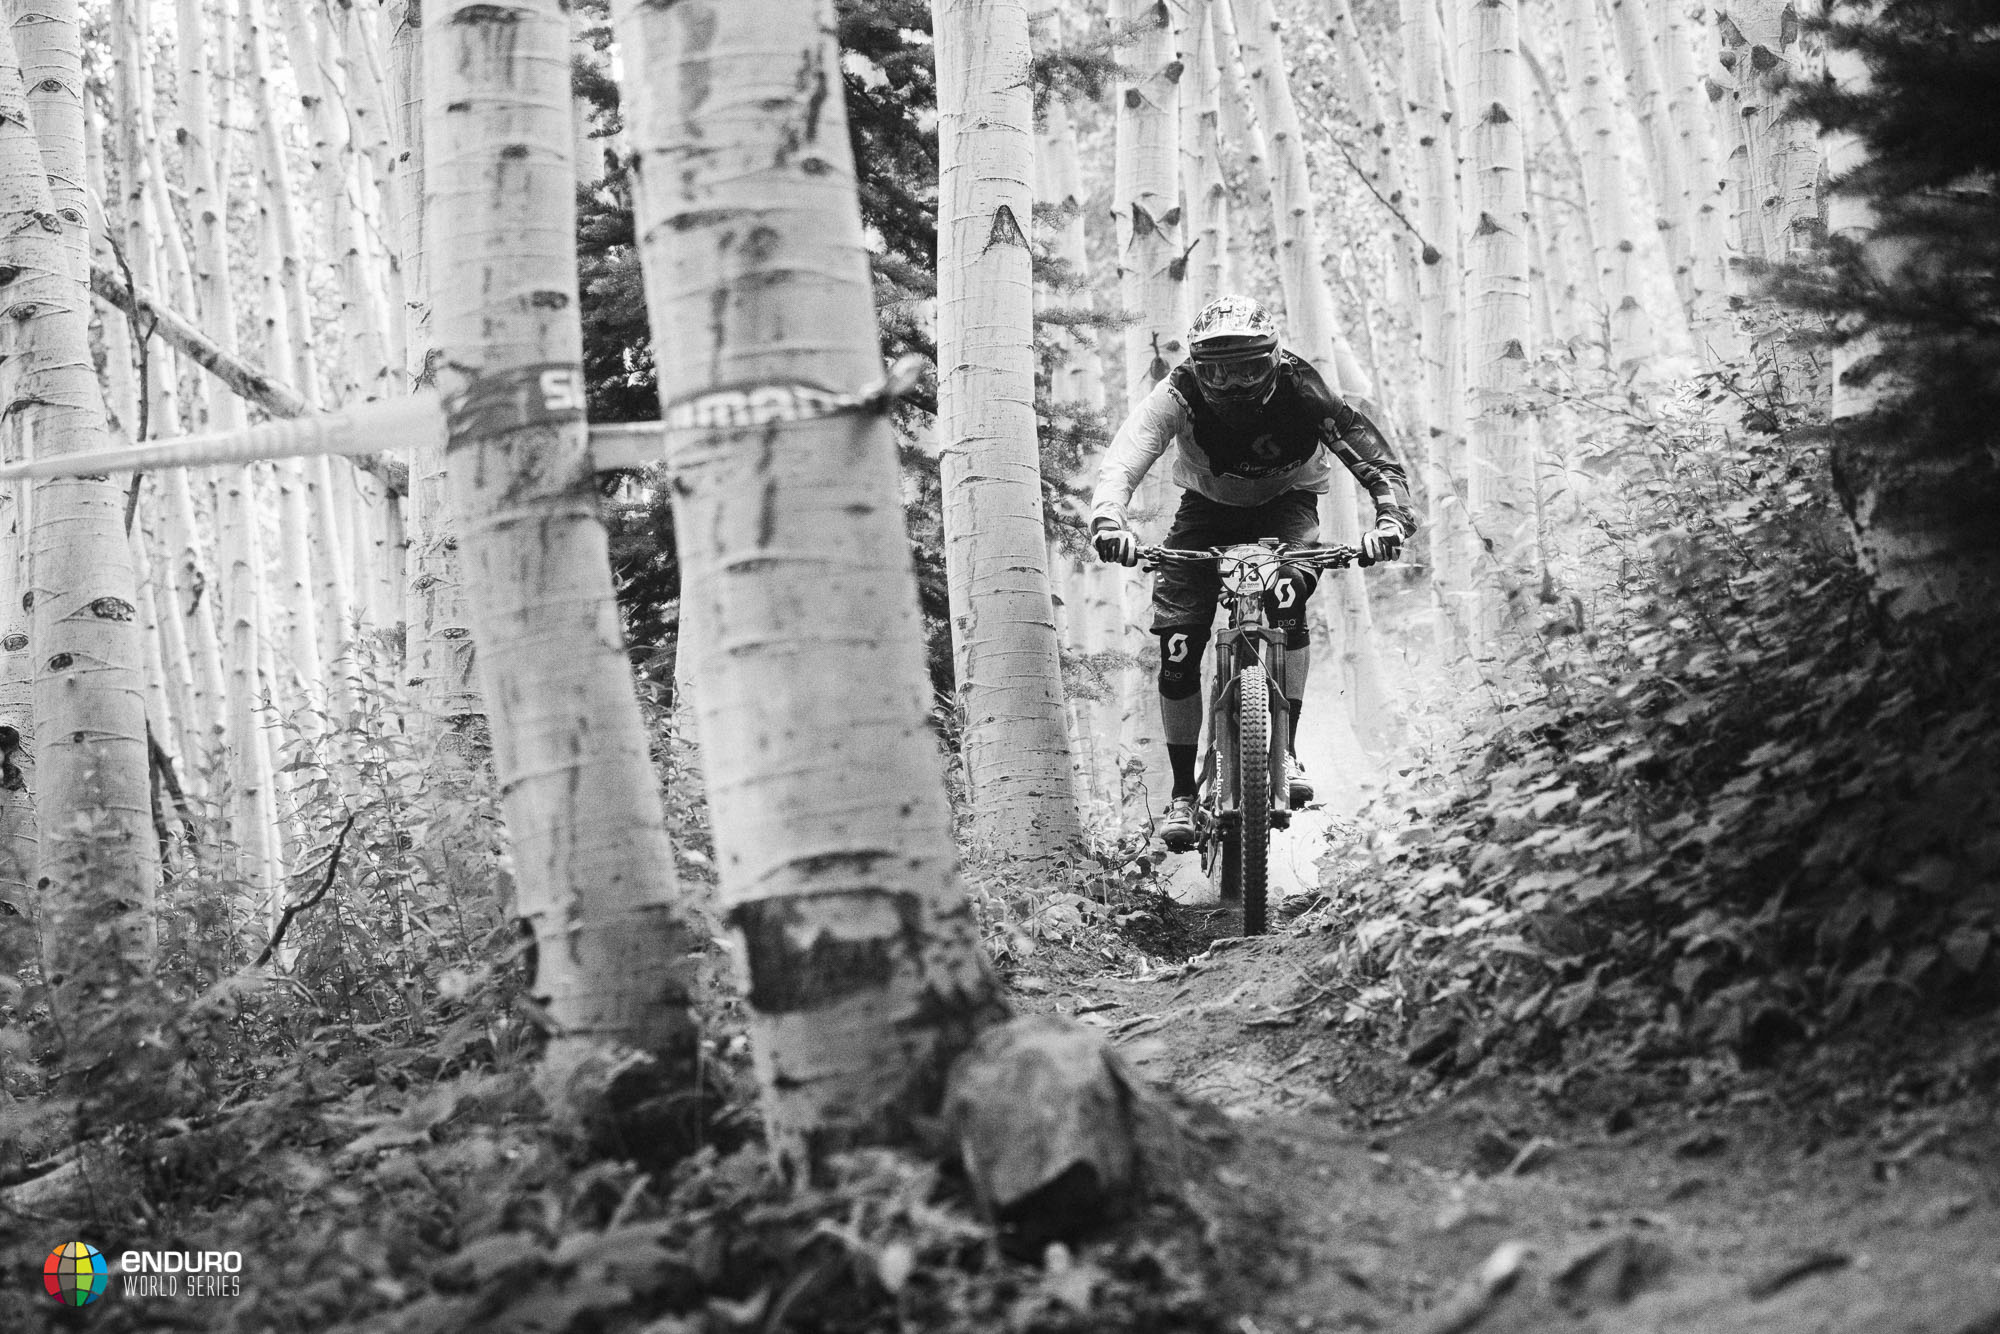 Remy Absalon has had a consistent day and pushed hard in the aspens to 7th overall